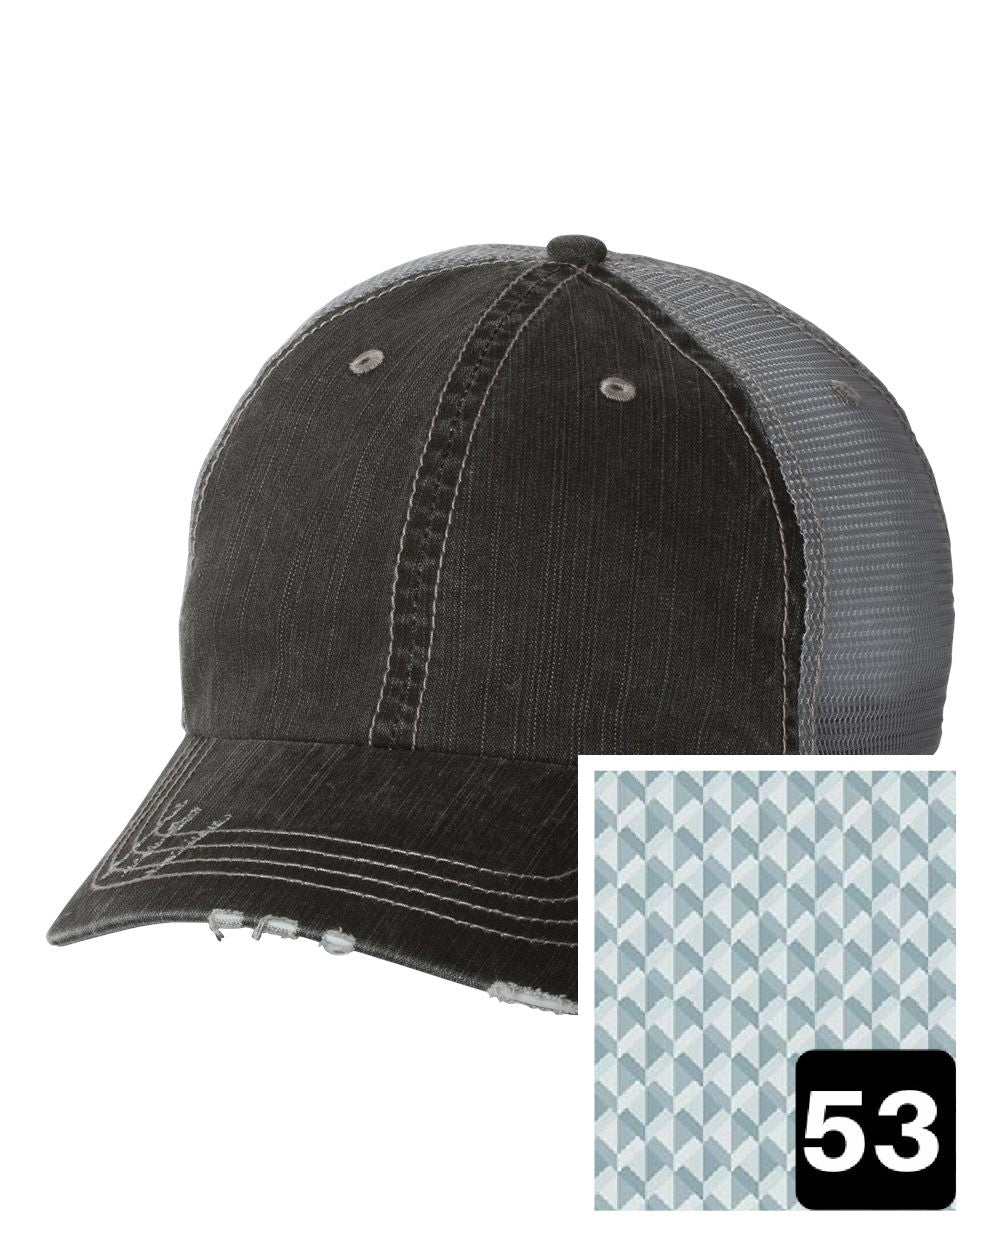 gray distressed trucker hat with multi-color stripe fabric state of Wisconsin